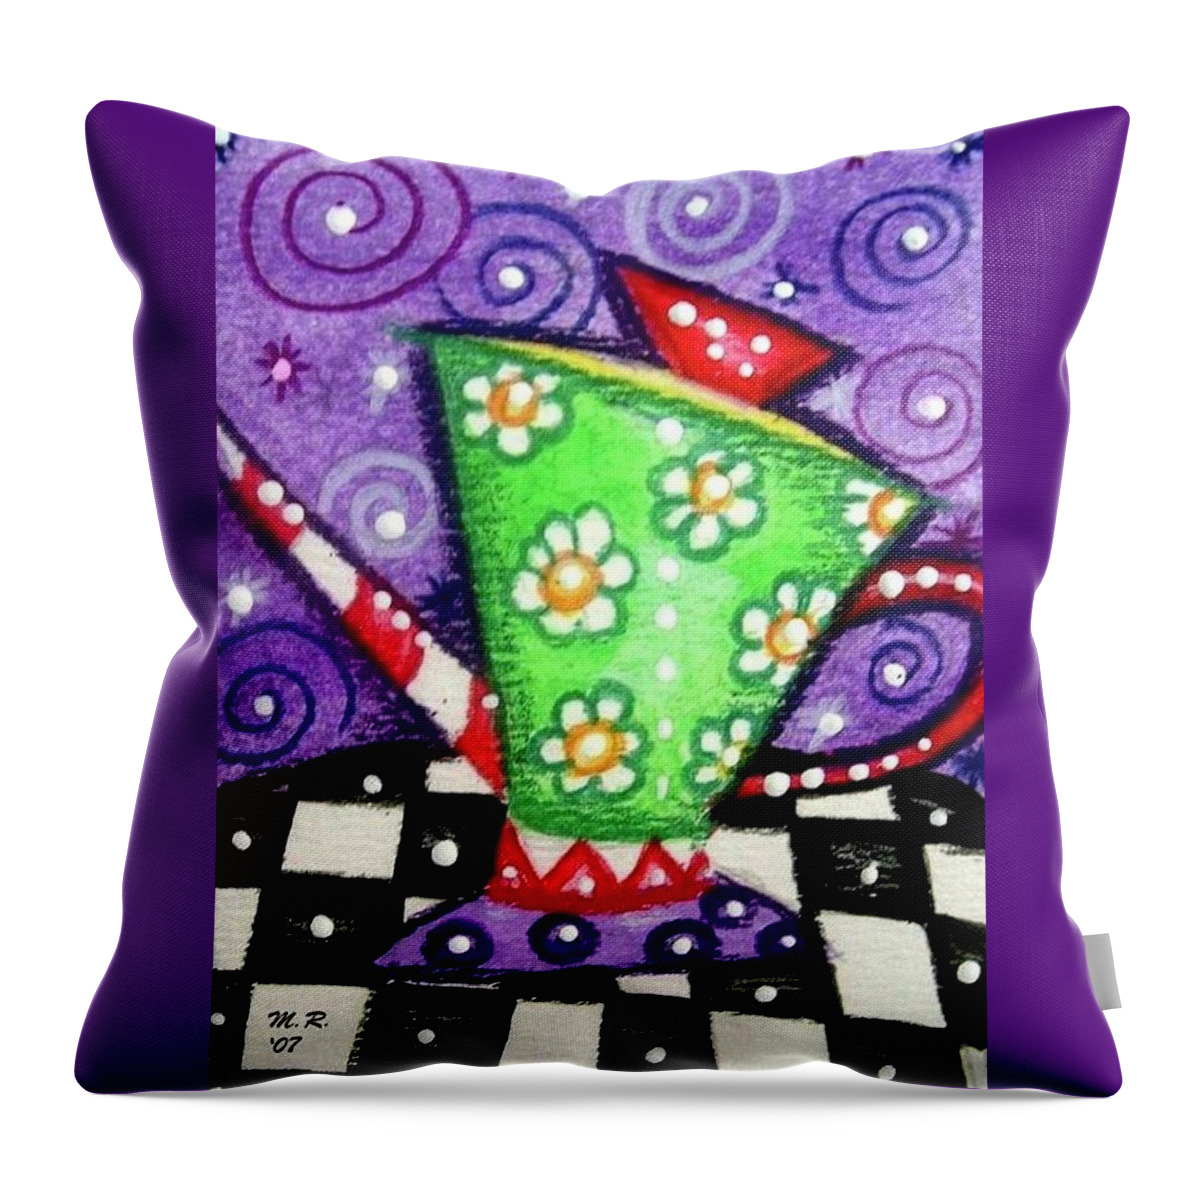 Whimsical Throw Pillow featuring the painting Whimsical Green Teapot by Monica Resinger